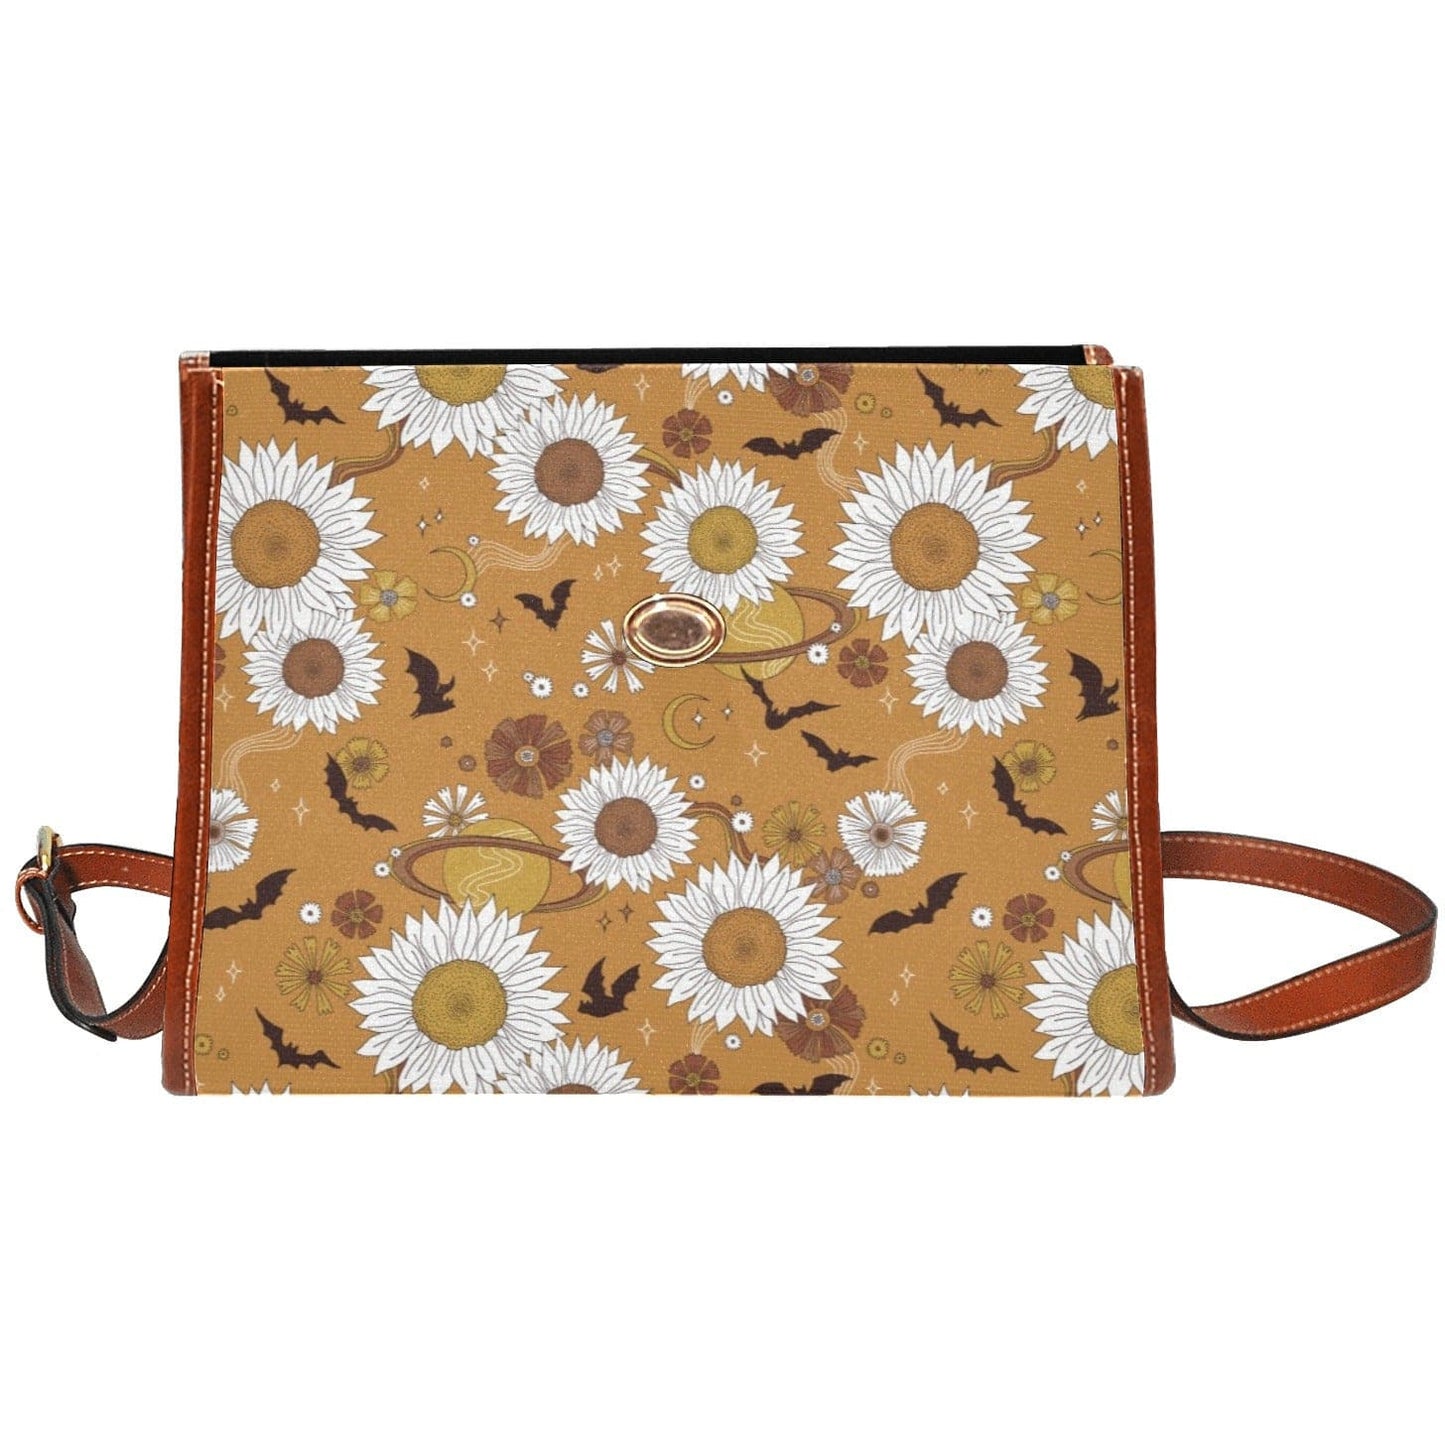 Bats and Sunflowers Canvas Bag